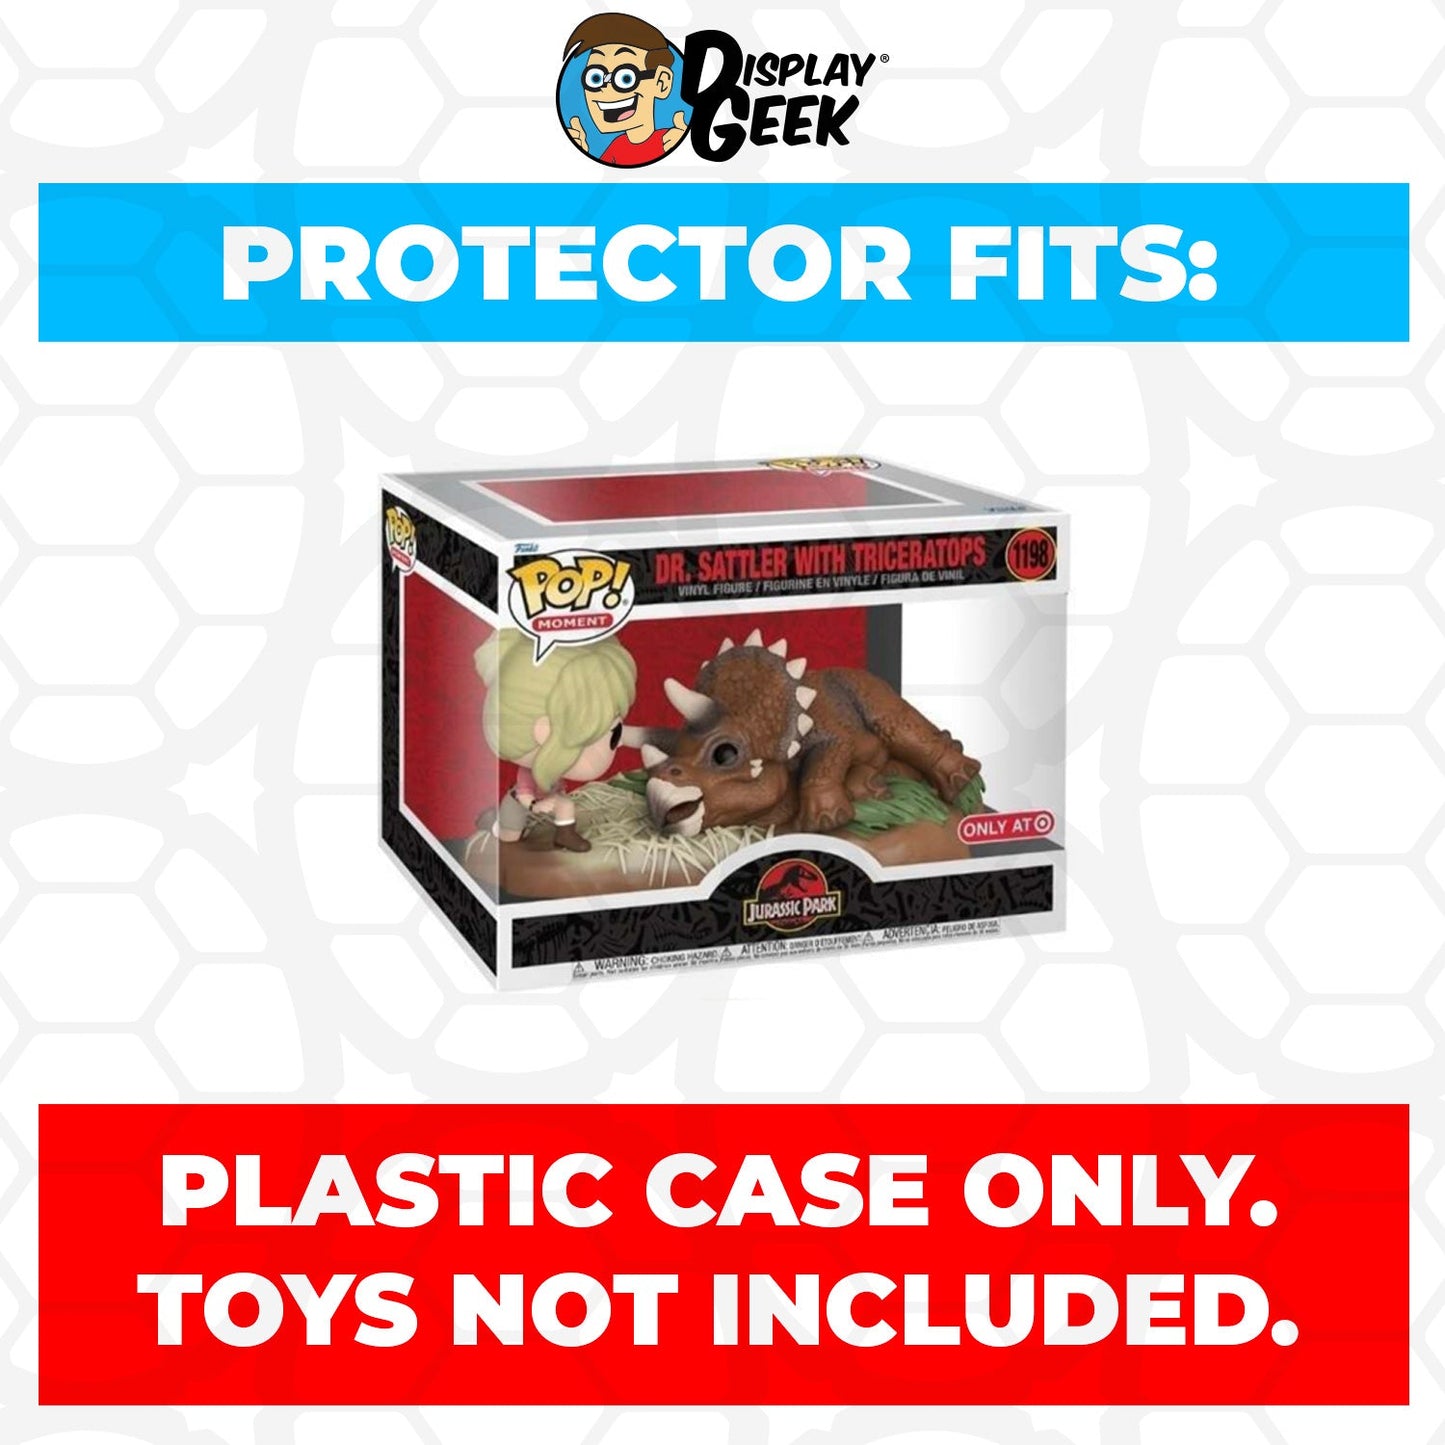 Pop Protector for Jurassic Park Dr. Sattler with Triceratops #1198 Funko Pop Town - PPG Pop Protector Guide Search Created by Display Geek